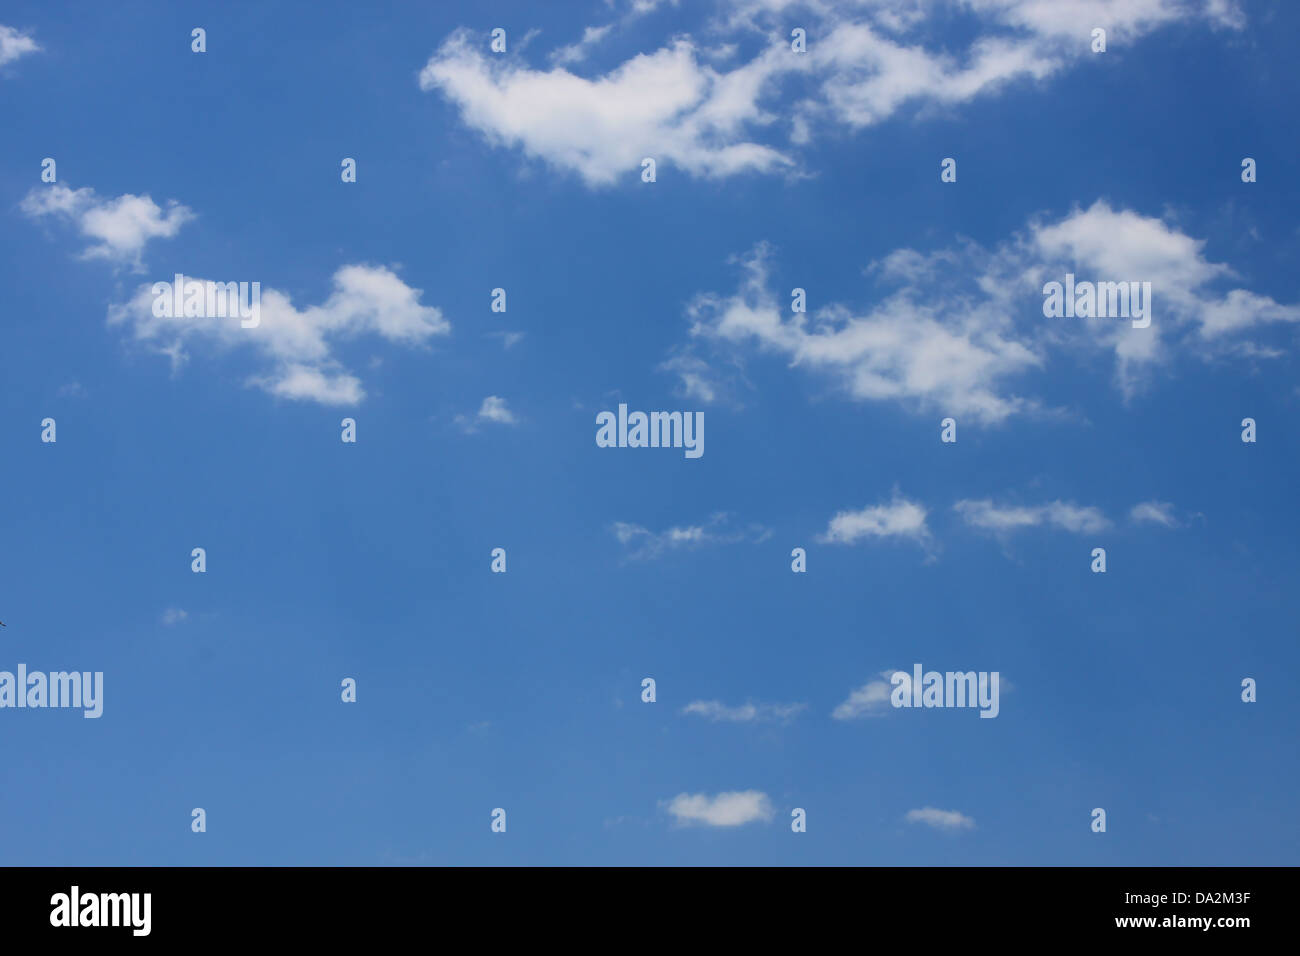 Blu sky with some white clouds, like nice clouds background. Stock Photo